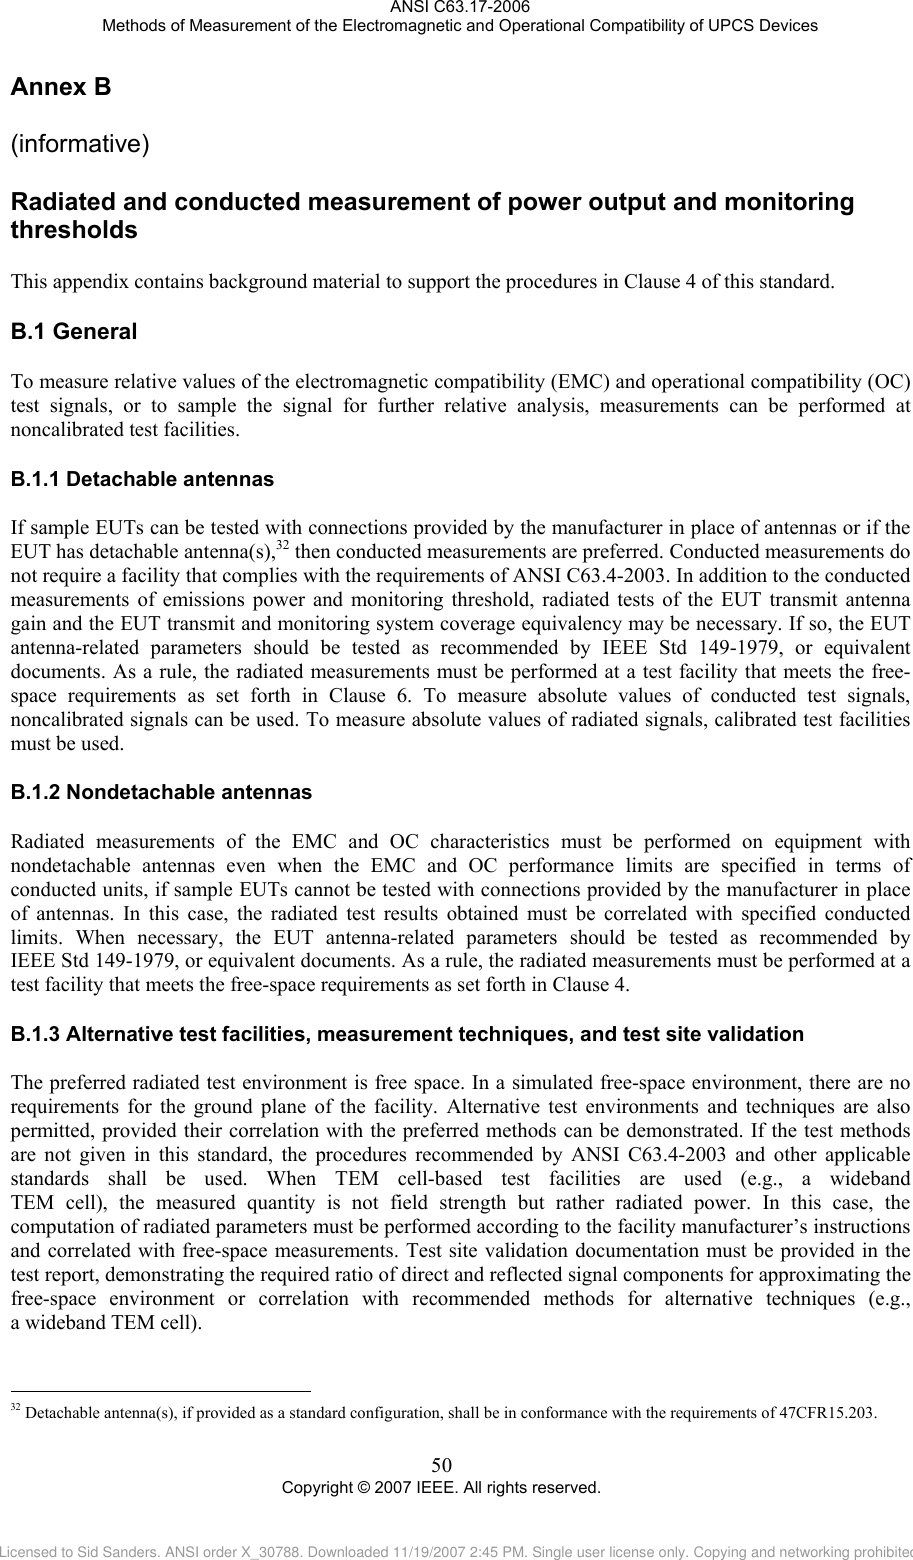 ANSI C63.17-2006 Methods of Measurement of the Electromagnetic and Operational Compatibility of UPCS Devices Annex B B.1B.1.1B.1.2B.1.3                                                   (informative)  Radiated and conducted measurement of power output and monitoring thresholds This appendix contains background material to support the procedures in Clause 4 of this standard.  General To measure relative values of the electromagnetic compatibility (EMC) and operational compatibility (OC) test signals, or to sample the signal for further relative analysis, measurements can be performed at noncalibrated test facilities.  Detachable antennas If sample EUTs can be tested with connections provided by the manufacturer in place of antennas or if the EUT has detachable antenna(s),32 then conducted measurements are preferred. Conducted measurements do not require a facility that complies with the requirements of ANSI C63.4-2003. In addition to the conducted measurements of emissions power and monitoring threshold, radiated tests of the EUT transmit antenna gain and the EUT transmit and monitoring system coverage equivalency may be necessary. If so, the EUT antenna-related parameters should be tested as recommended by IEEE Std 149-1979, or equivalent documents. As a rule, the radiated measurements must be performed at a test facility that meets the free-space requirements as set forth in Clause 6. To measure absolute values of conducted test signals, noncalibrated signals can be used. To measure absolute values of radiated signals, calibrated test facilities must be used.  Nondetachable antennas Radiated measurements of the EMC and OC characteristics must be performed on equipment with nondetachable antennas even when the EMC and OC performance limits are specified in terms of conducted units, if sample EUTs cannot be tested with connections provided by the manufacturer in place of antennas. In this case, the radiated test results obtained must be correlated with specified conducted limits. When necessary, the EUT antenna-related parameters should be tested as recommended by  IEEE Std 149-1979, or equivalent documents. As a rule, the radiated measurements must be performed at a test facility that meets the free-space requirements as set forth in Clause 4. Alternative test facilities, measurement techniques, and test site validation The preferred radiated test environment is free space. In a simulated free-space environment, there are no requirements for the ground plane of the facility. Alternative test environments and techniques are also permitted, provided their correlation with the preferred methods can be demonstrated. If the test methods are not given in this standard, the procedures recommended by ANSI C63.4-2003 and other applicable standards shall be used. When TEM cell-based test facilities are used (e.g., a wideband  TEM cell), the measured quantity is not field strength but rather radiated power. In this case, the computation of radiated parameters must be performed according to the facility manufacturer’s instructions and correlated with free-space measurements. Test site validation documentation must be provided in the test report, demonstrating the required ratio of direct and reflected signal components for approximating the free-space environment or correlation with recommended methods for alternative techniques (e.g.,  a wideband TEM cell).  32 Detachable antenna(s), if provided as a standard configuration, shall be in conformance with the requirements of 47CFR15.203. 50 Copyright © 2007 IEEE. All rights reserved. Licensed to Sid Sanders. ANSI order X_30788. Downloaded 11/19/2007 2:45 PM. Single user license only. Copying and networking prohibited.